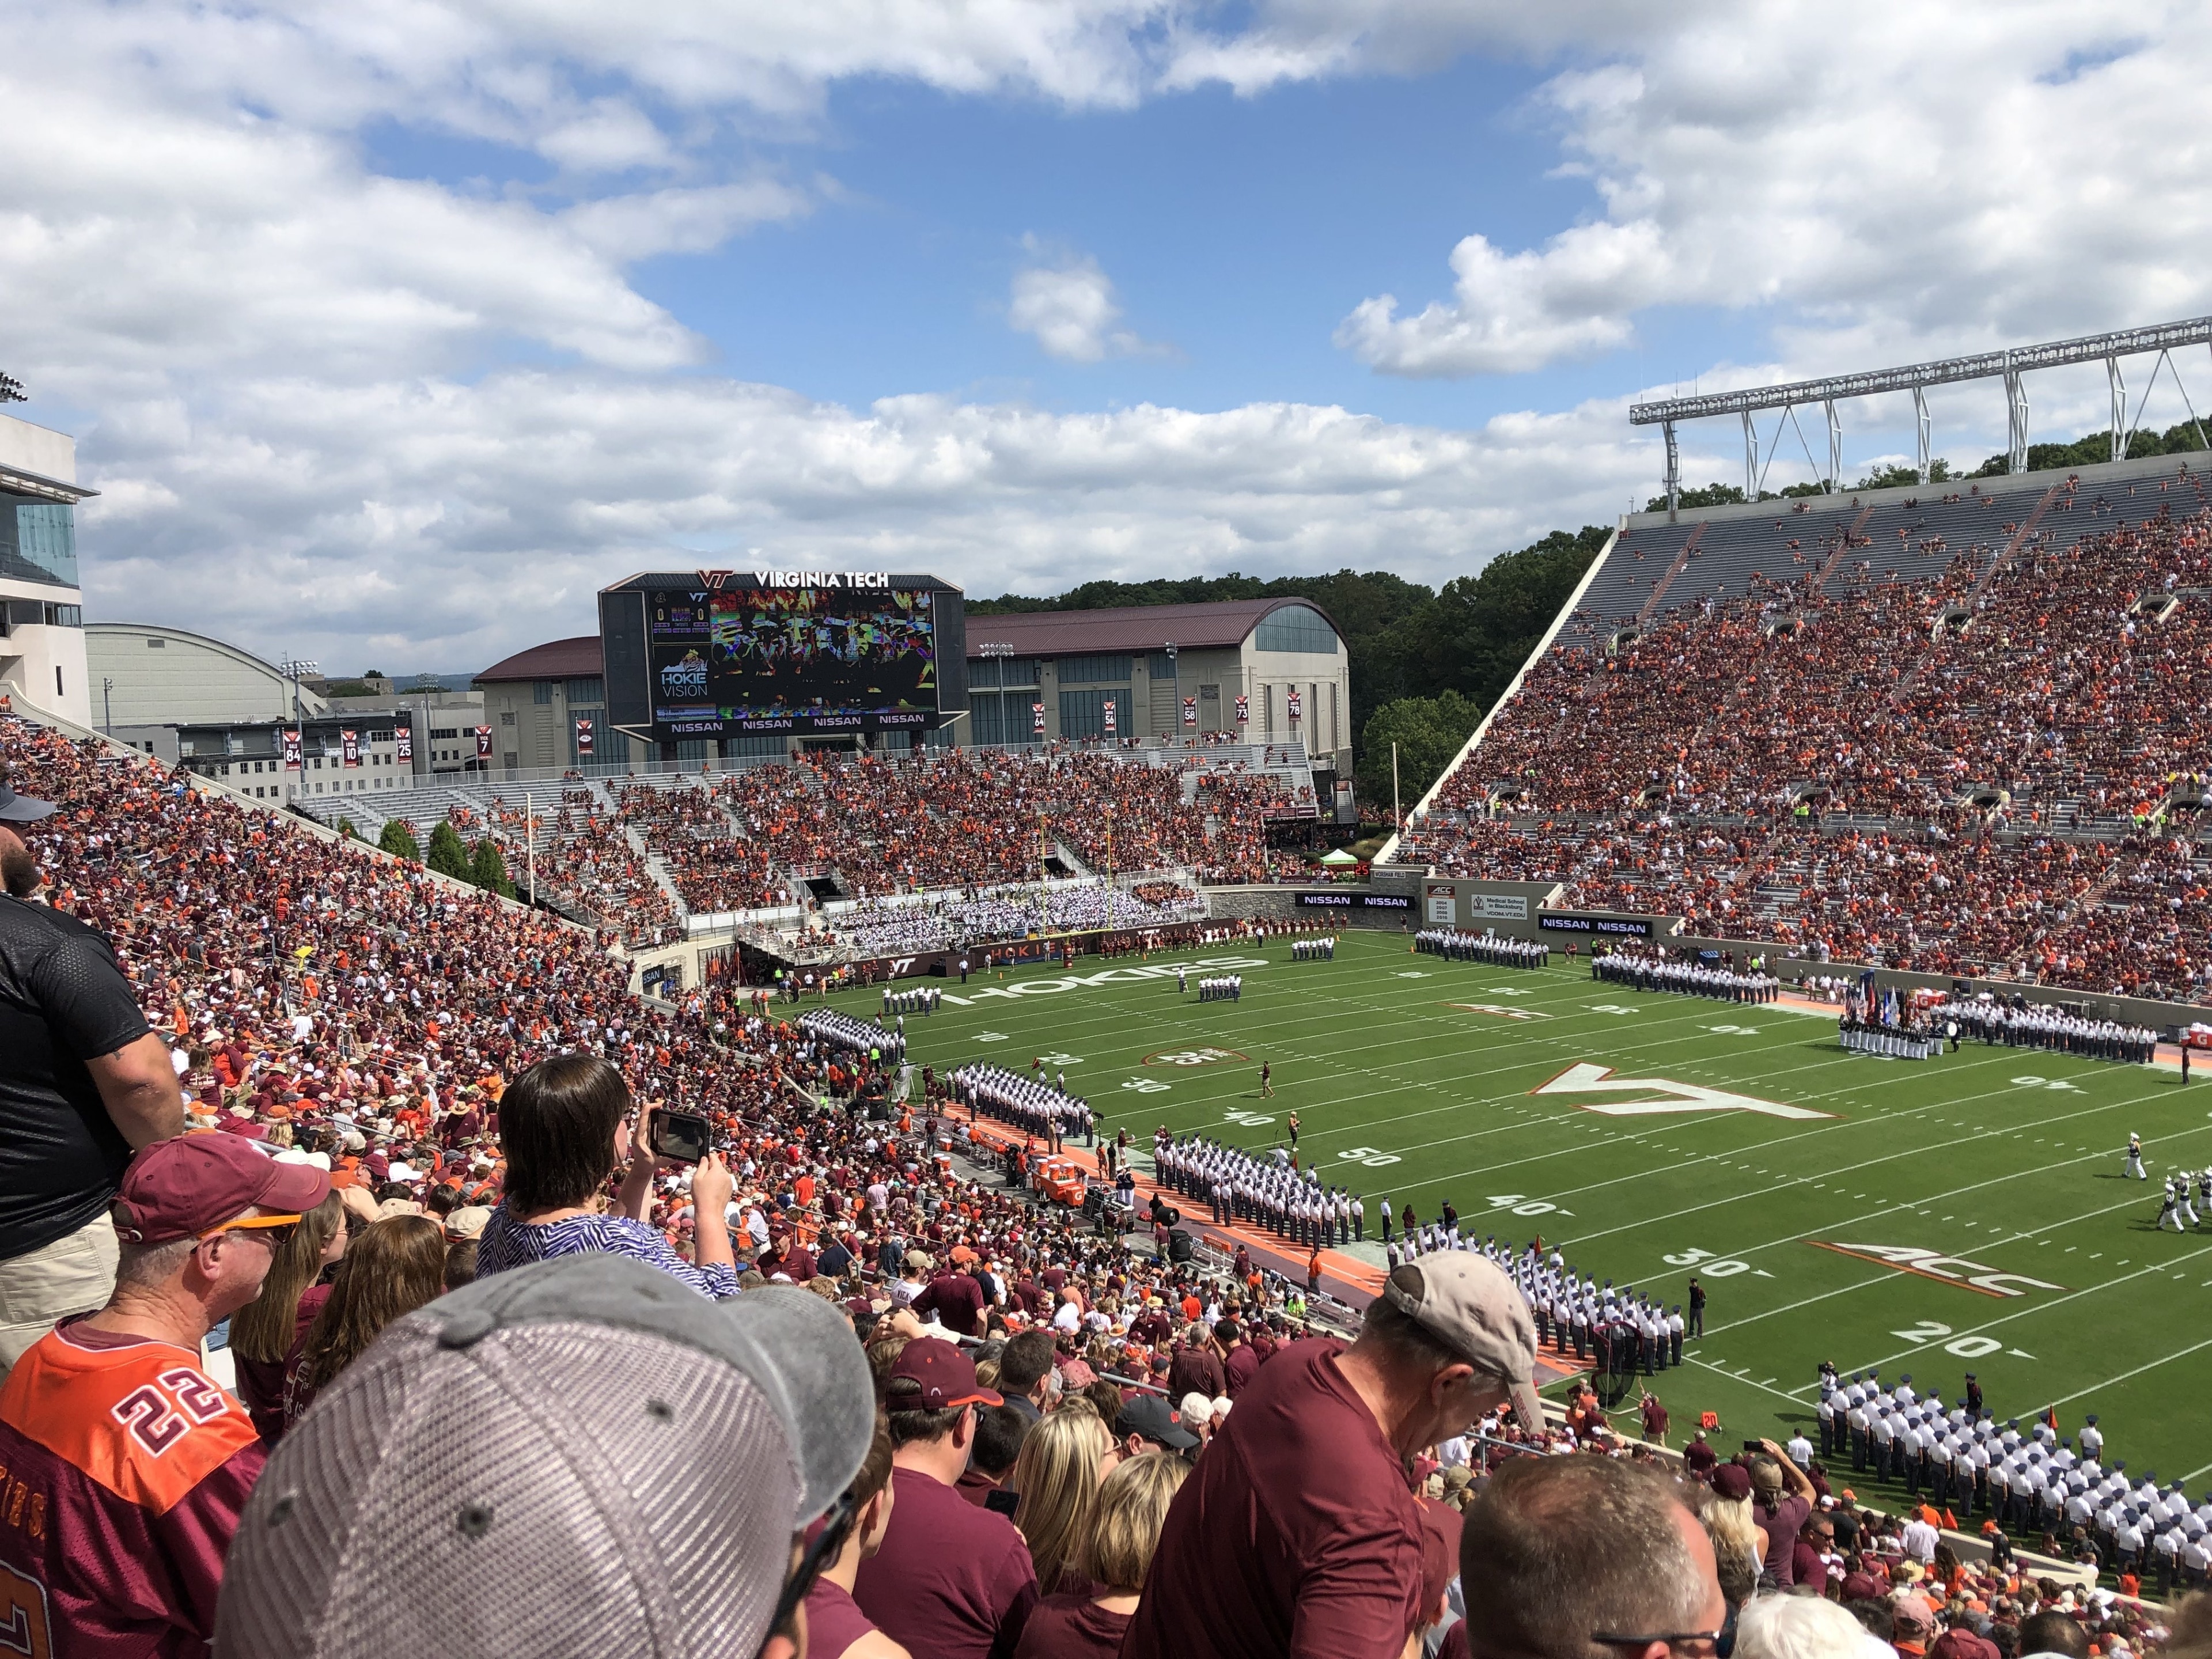 One of best locales in college football.